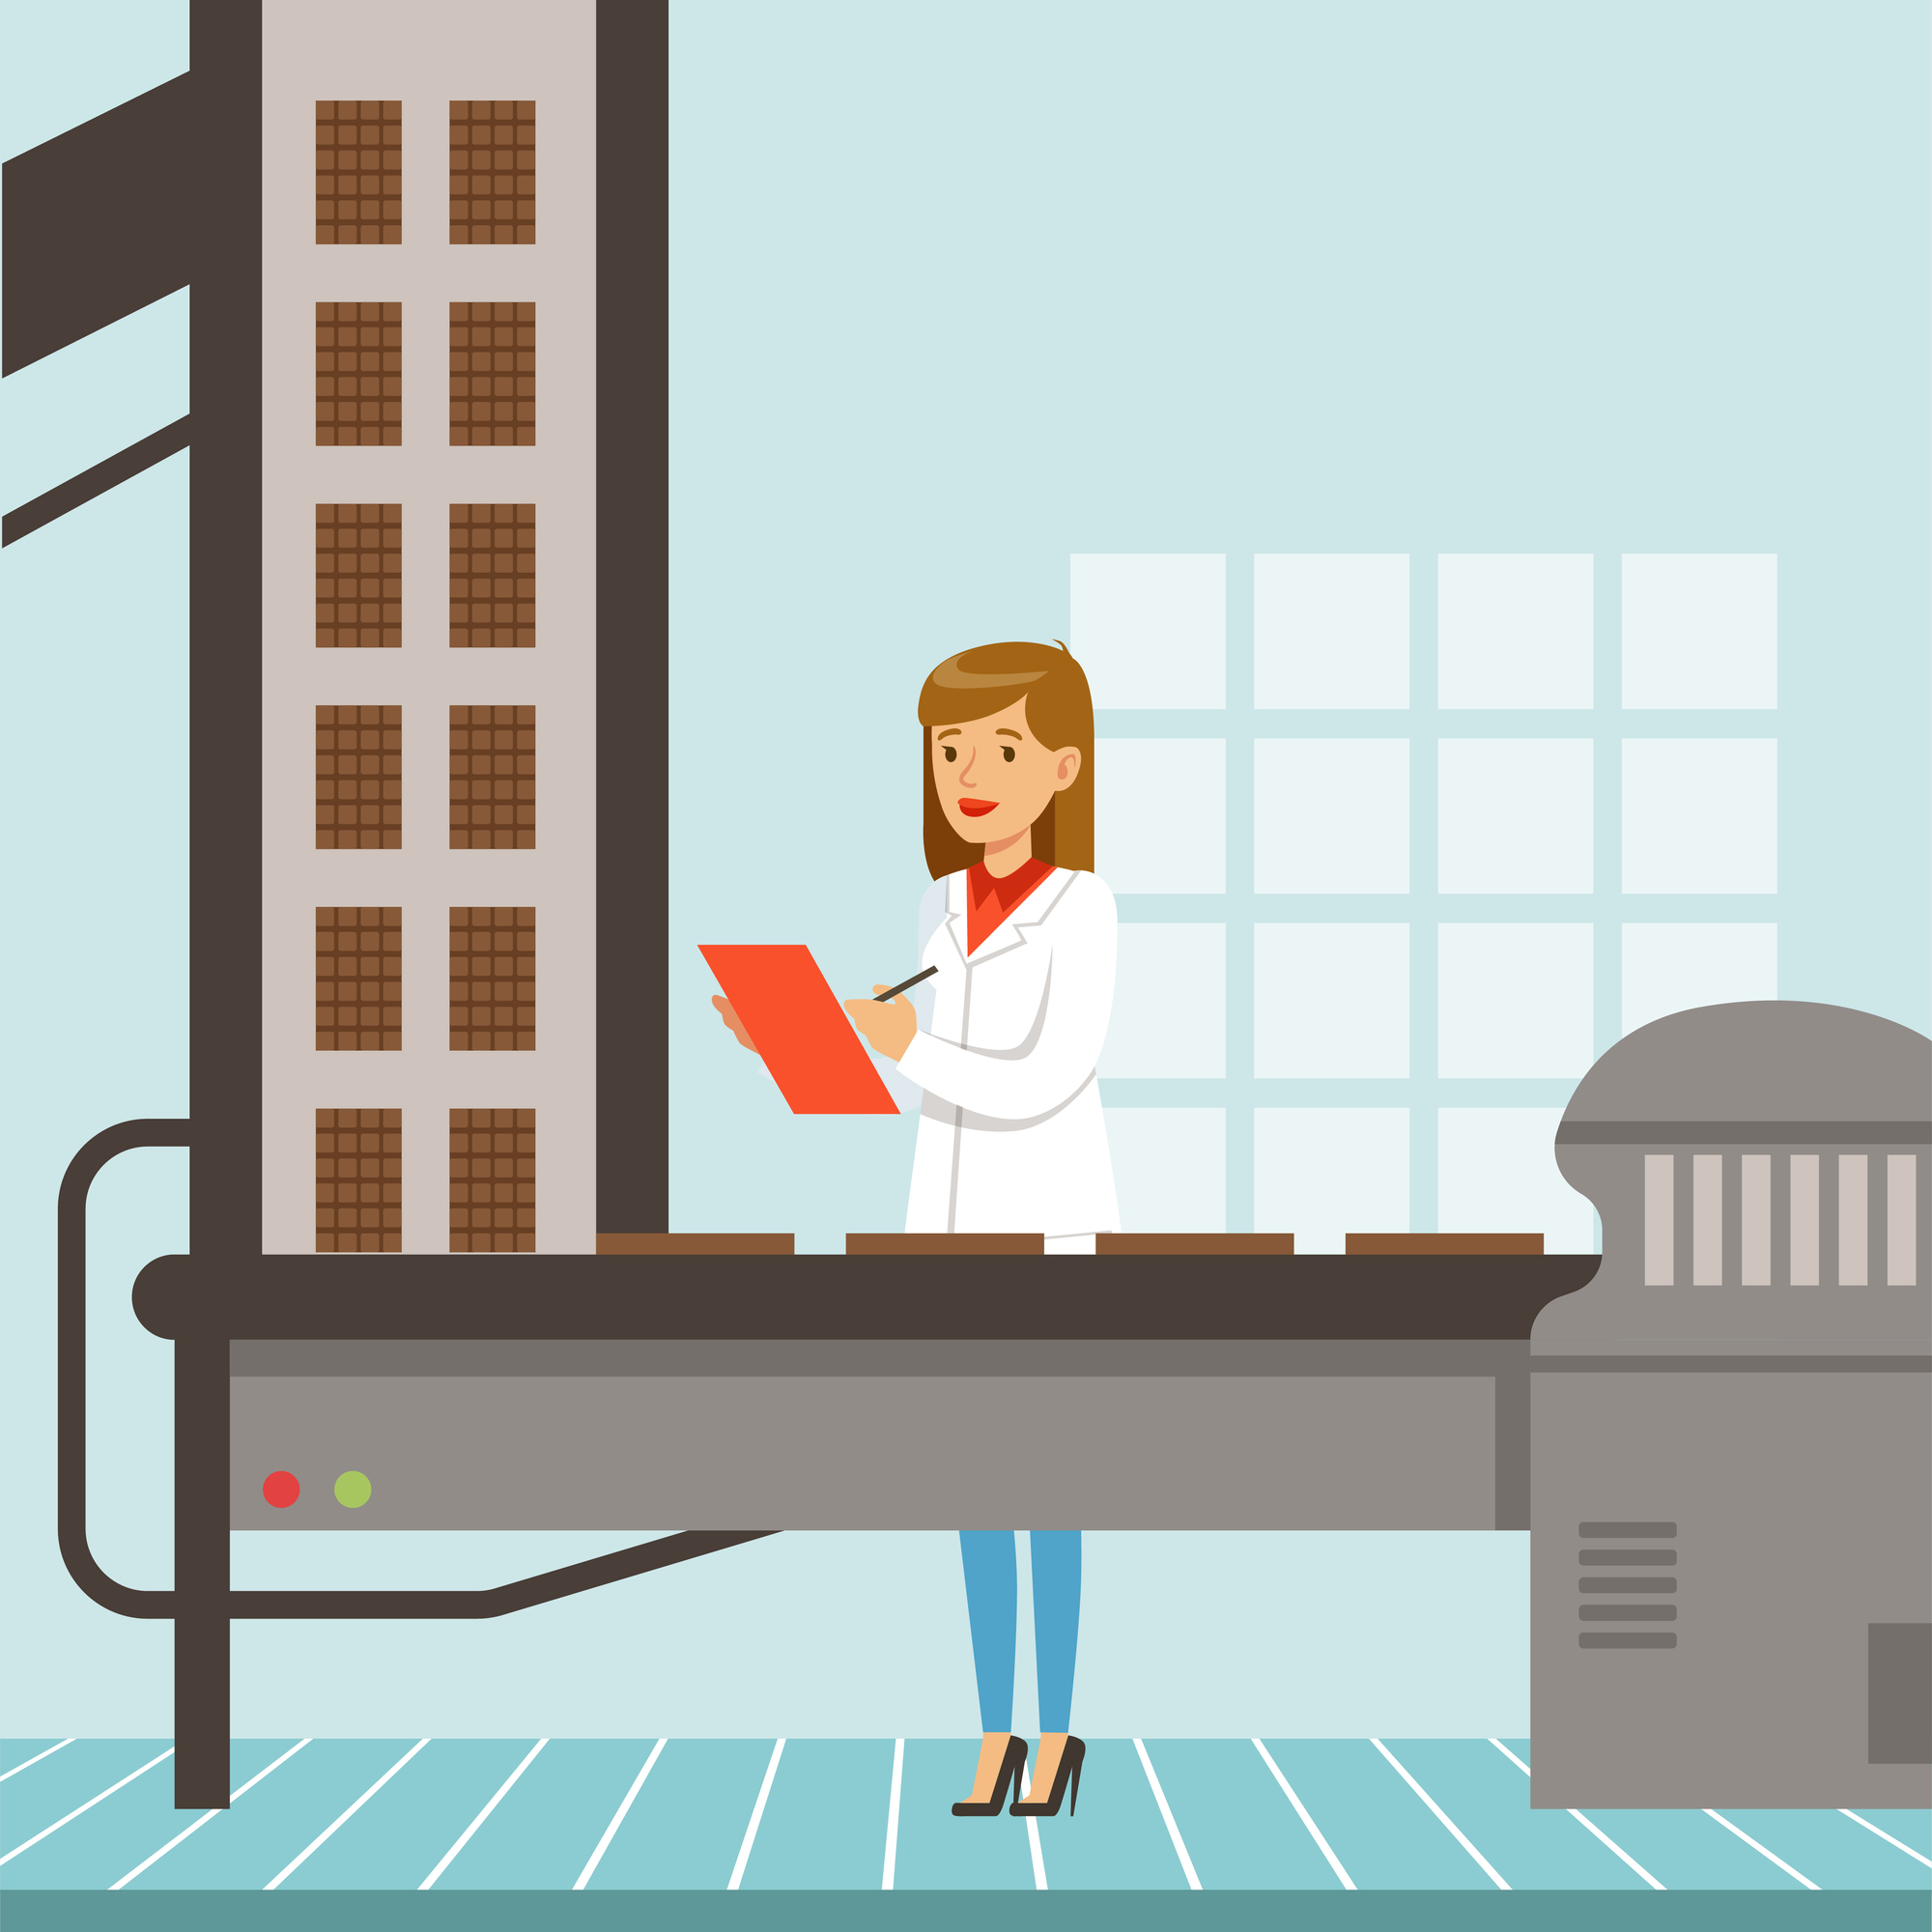  hocolate factory production line, female controller holding clipboard and controlling the production process chocolate bars vector Illustration, web design